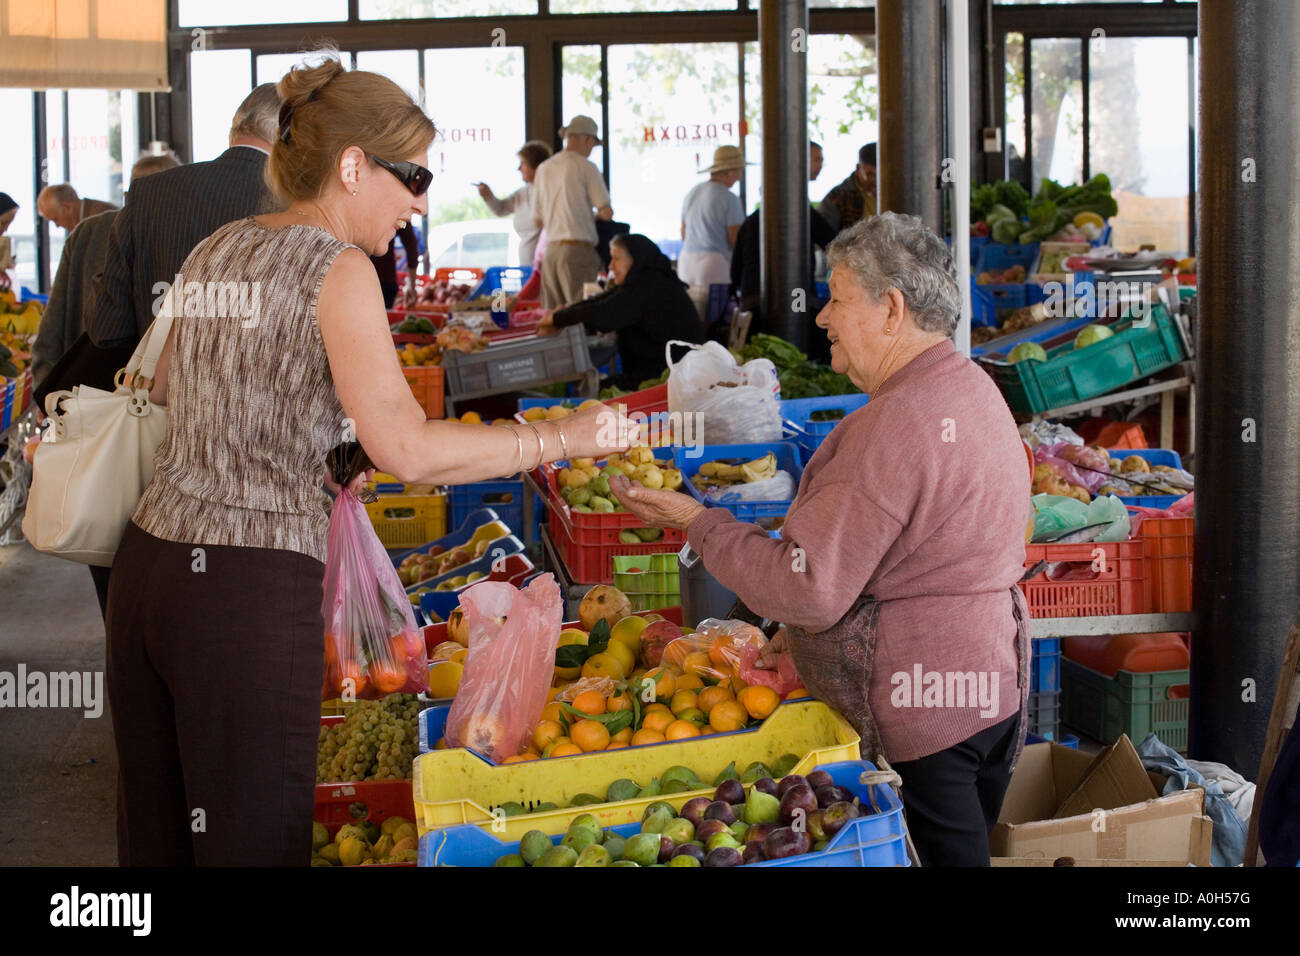 SHOPPERS AT THE LOCAL MARKET IN THE TOWN CENTRE OF OLD PAPHOS, CYPRUS. Stock Photo